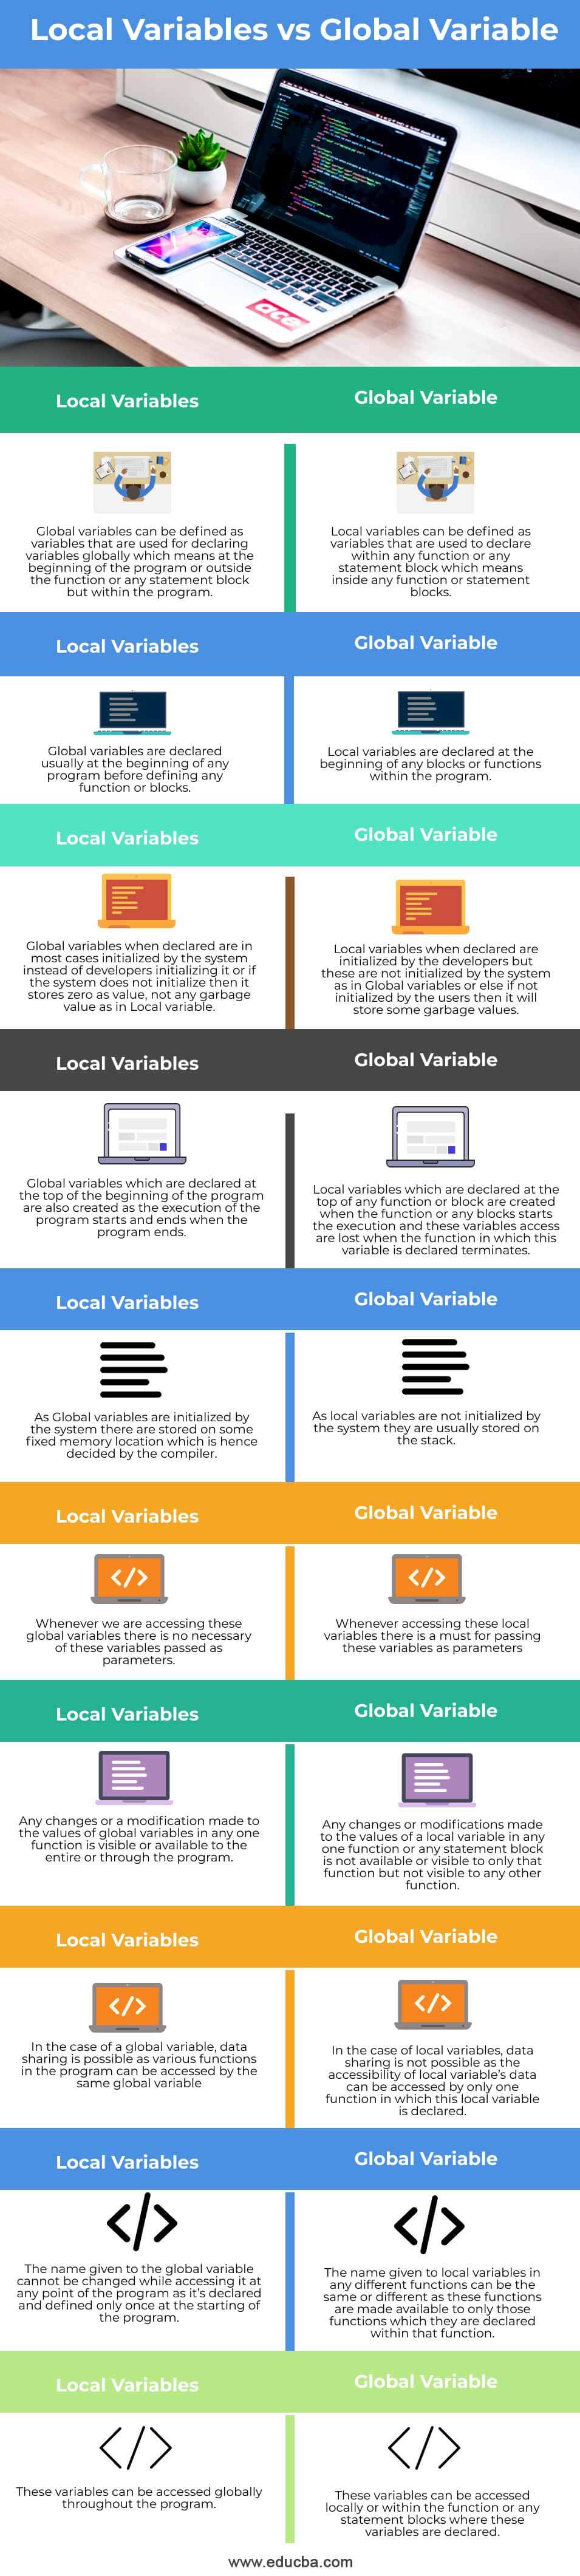 Local-Variables-vs-Global-Variable-info